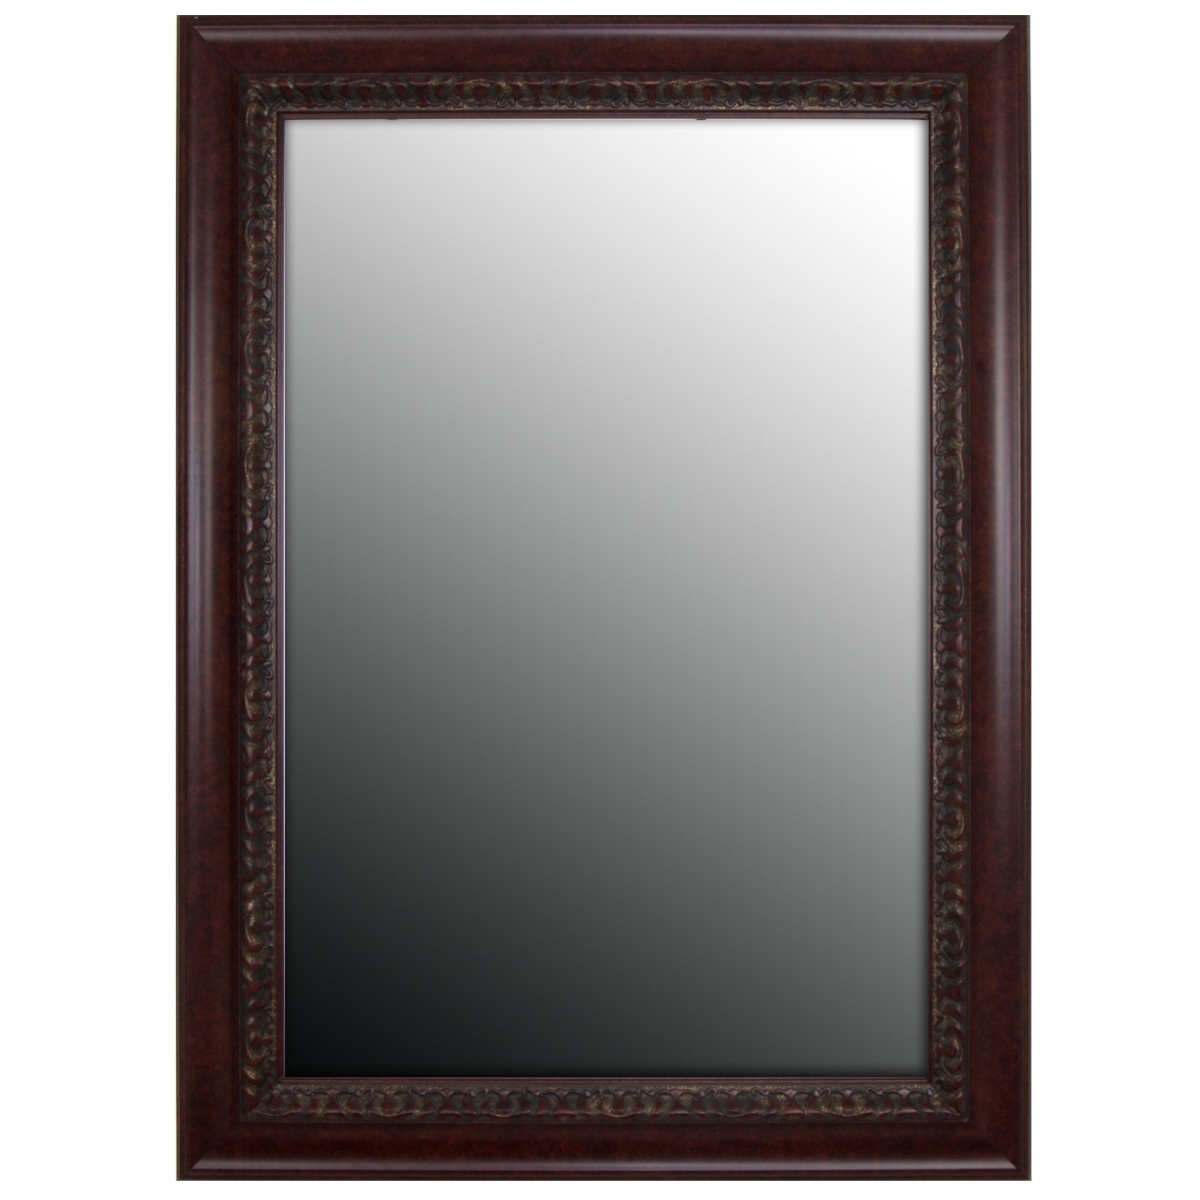 Hitchcock Butterfield 808408 Cherry Williamsburg Wall Mirror - 31 X 67 In.